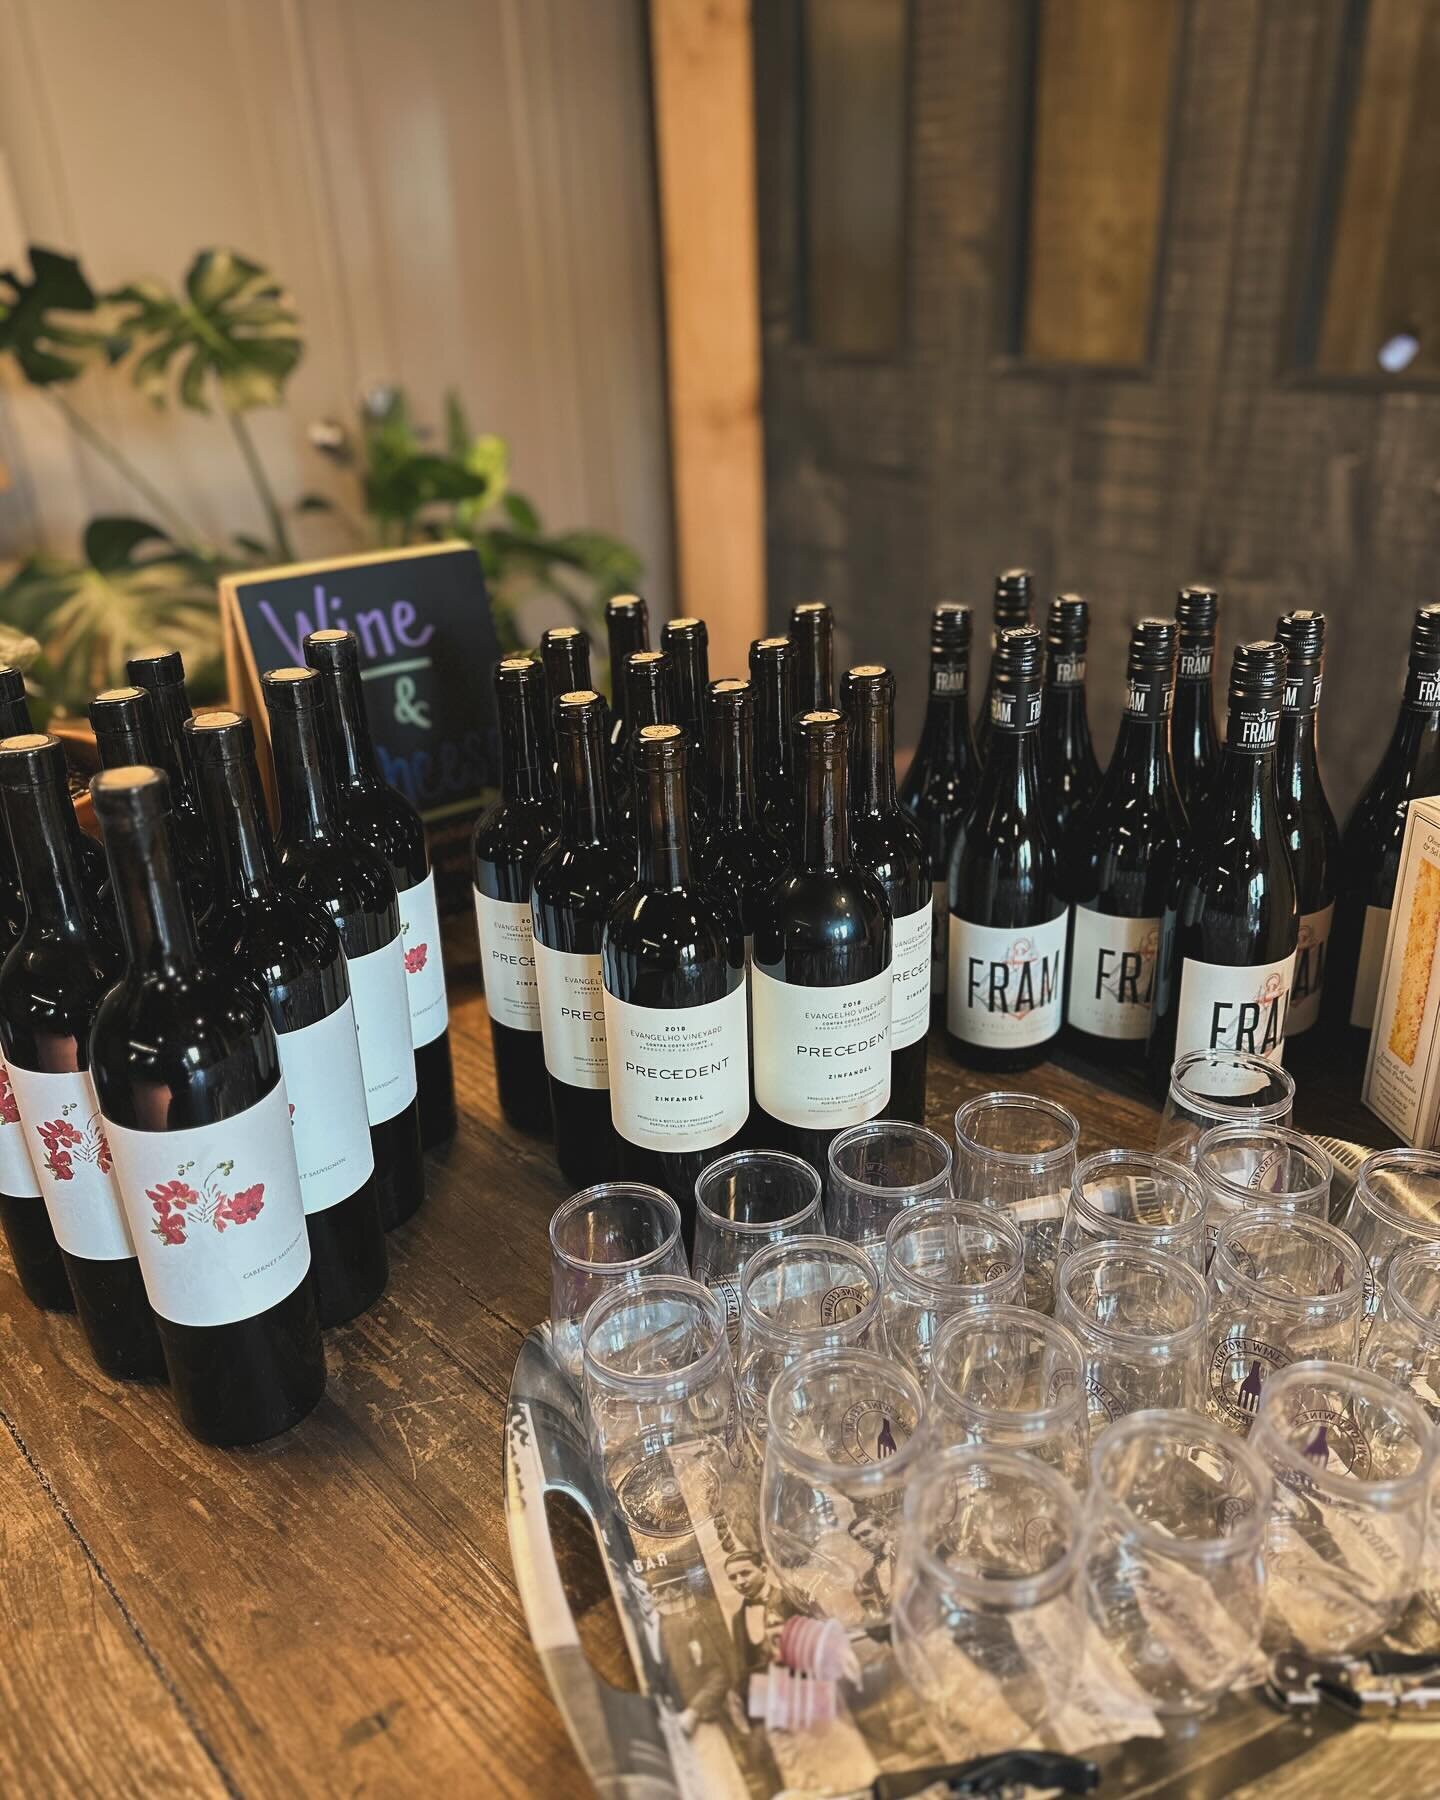 Setting up for today&rsquo;s tasting with my guest Pascal Schildt!! We are continuing our study of bold reds this week with the addition of a Red Zinfandel, a grape that lives on the boarder of &ldquo;medium&rdquo; to &ldquo;bold.&rdquo; Precedent Zi